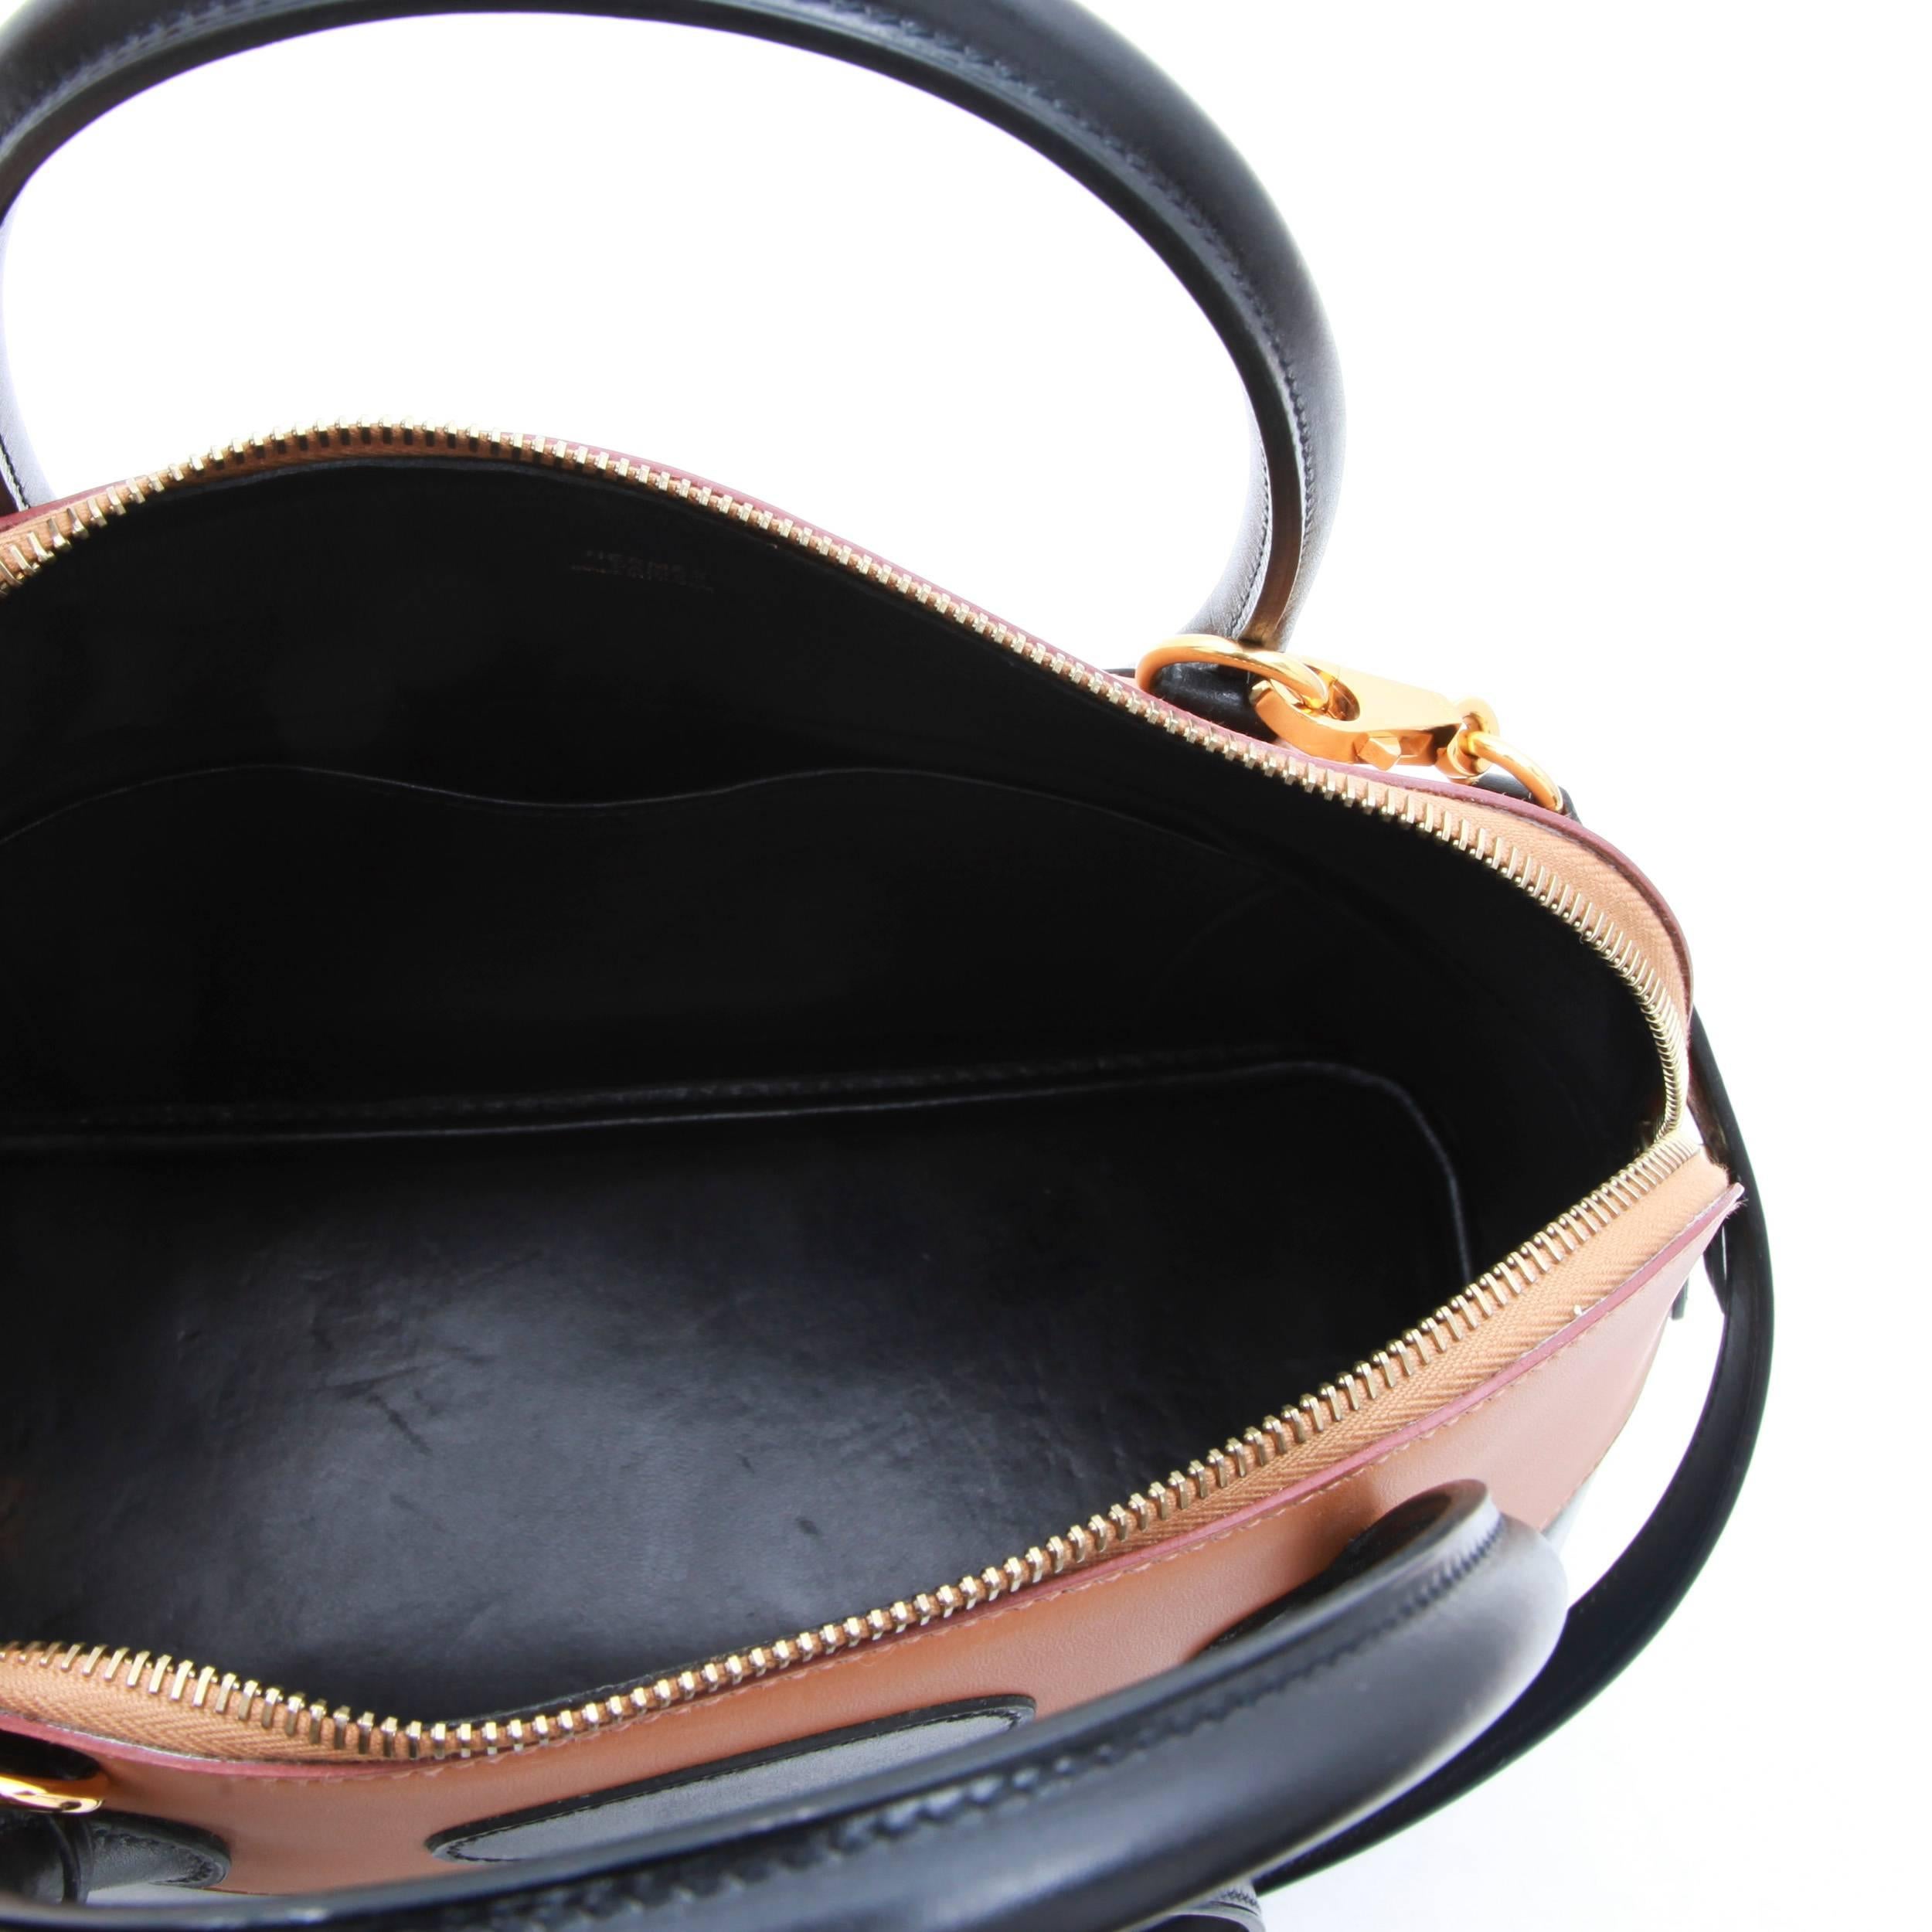 HERMES 'Bolide' Bag in Two-Tone Gold and Black Box Leather 3